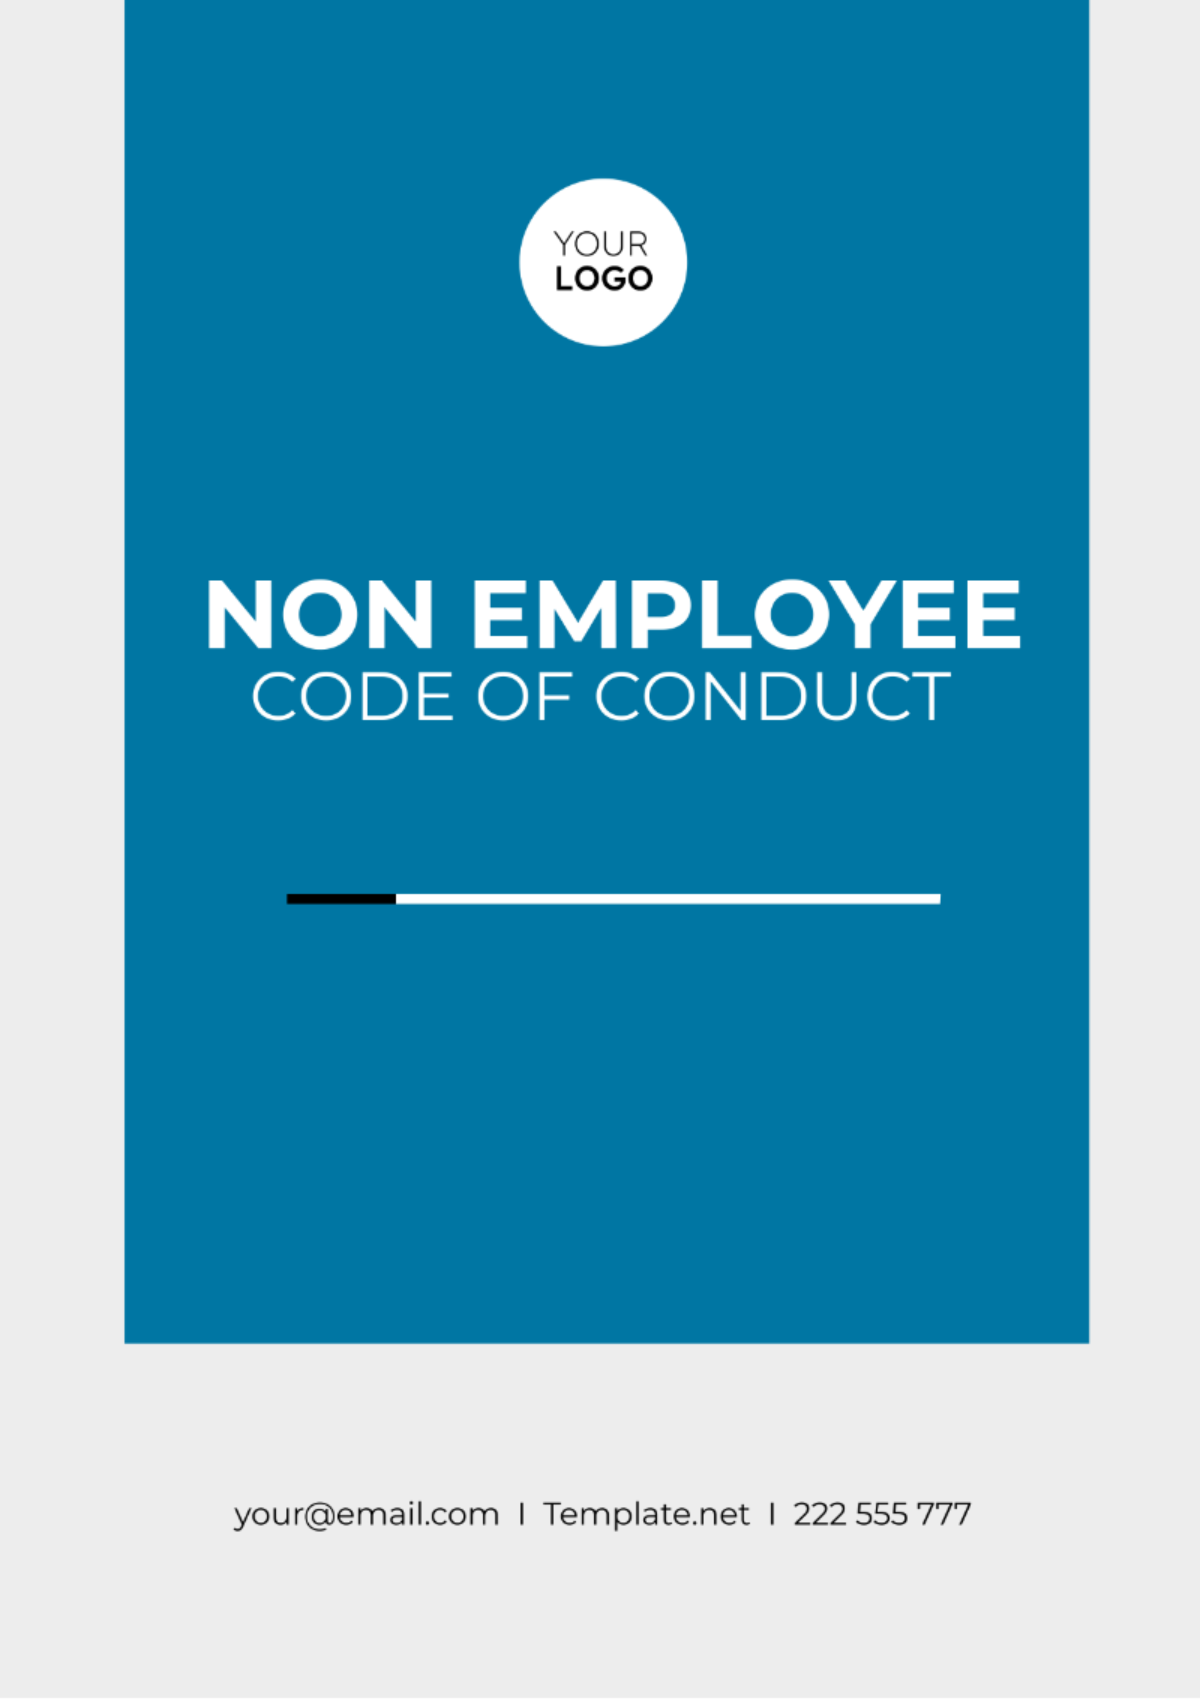 Free Non Employee Code of Conduct Template